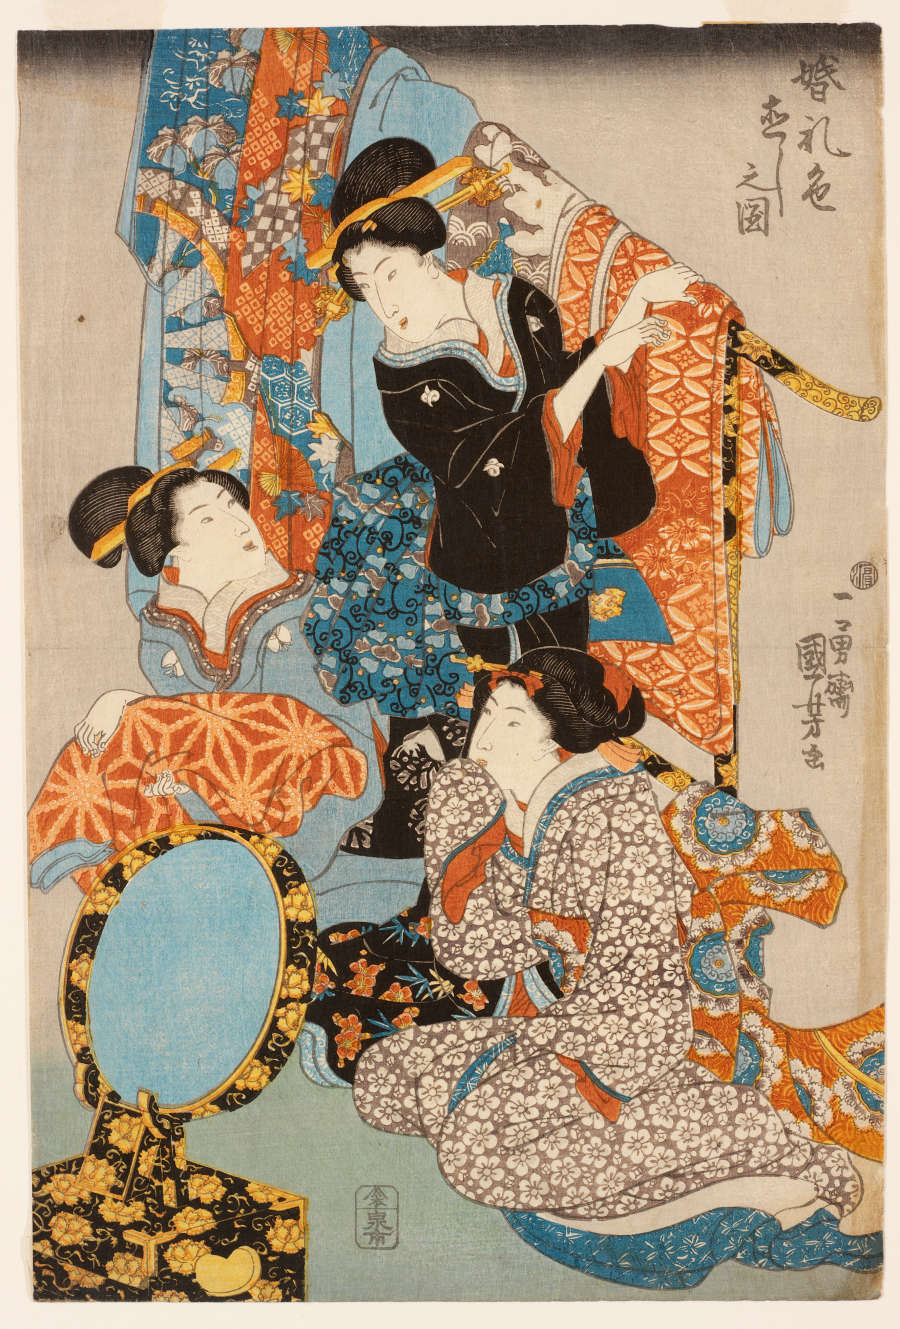 Traditional Japanese woodblock print of three women in intricate kimonos
folding vibrantly patterned fabrics. Two of the figures are looking at each other, while the other looks in a mirror.
